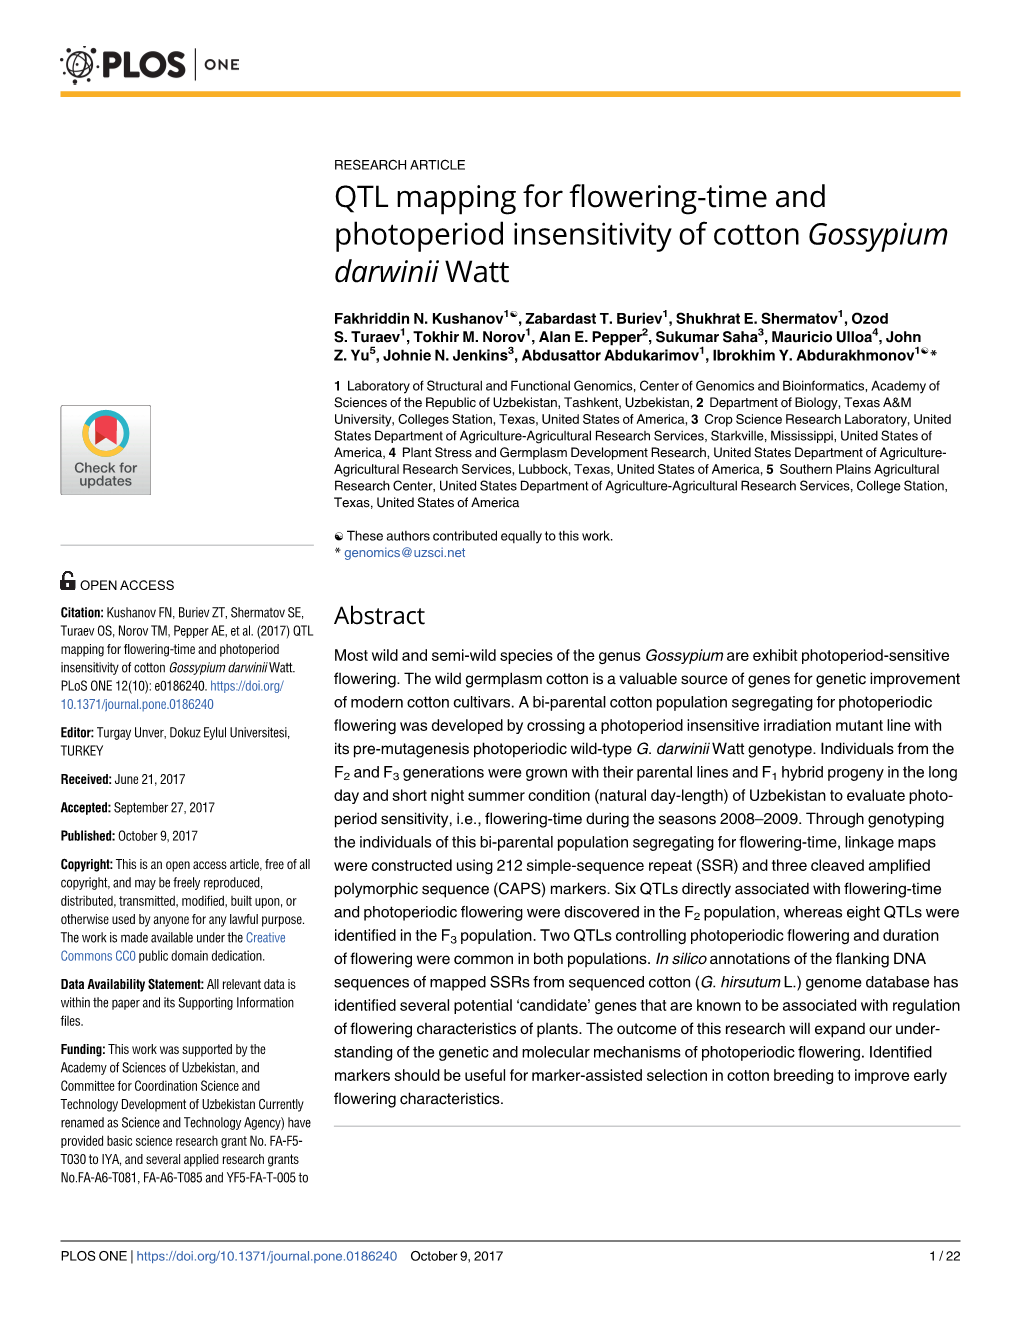 QTL Mapping for Flowering-Time and Photoperiod Insensitivity of Cotton Gossypium Darwinii Watt